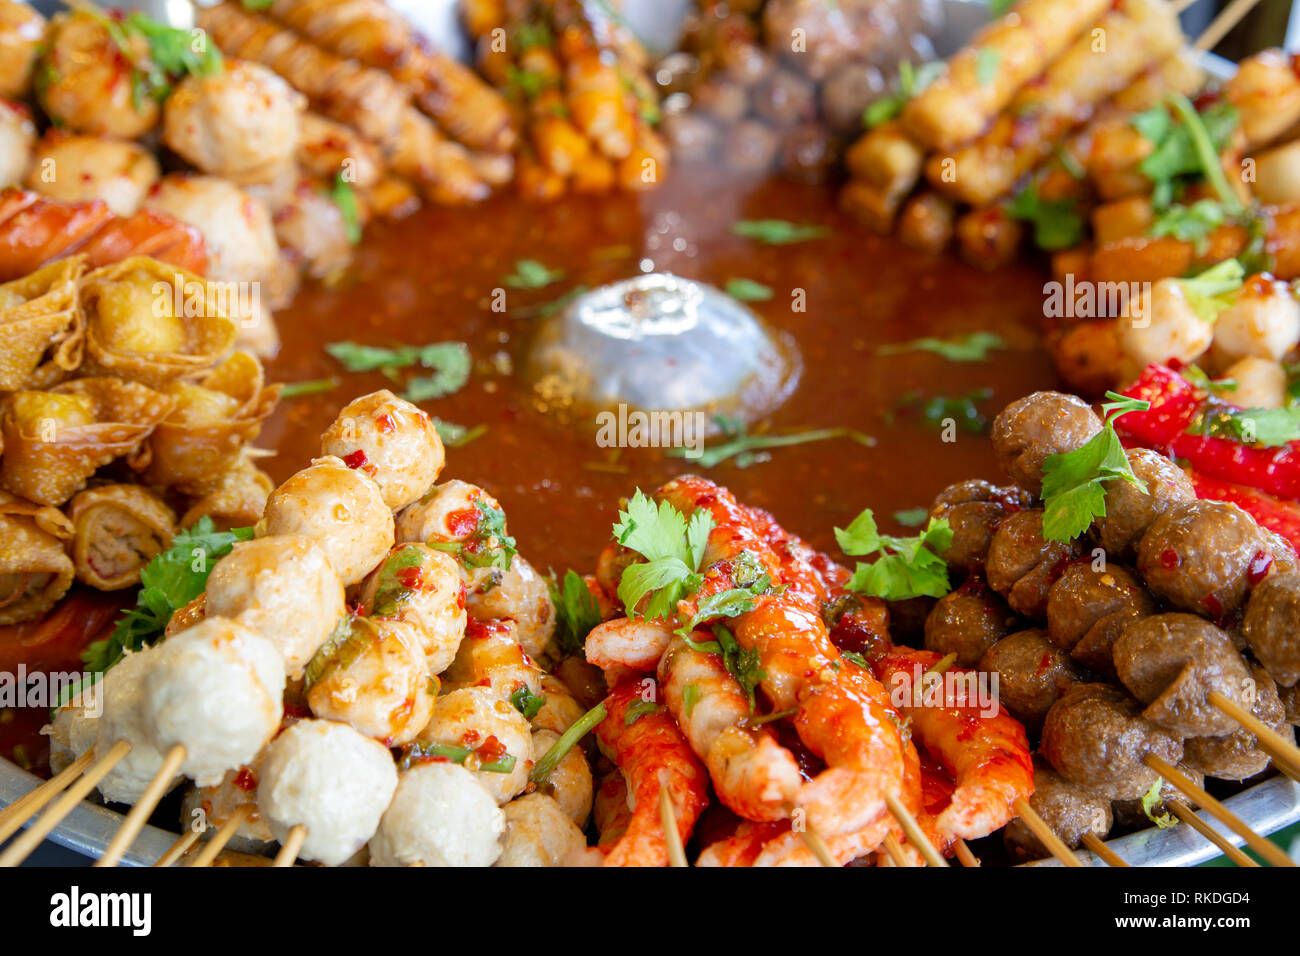 An arrangement of skewered cooked meat and seafood street food snacks and appetizers in a market stall in Phuket, Thailand. Stock Photo